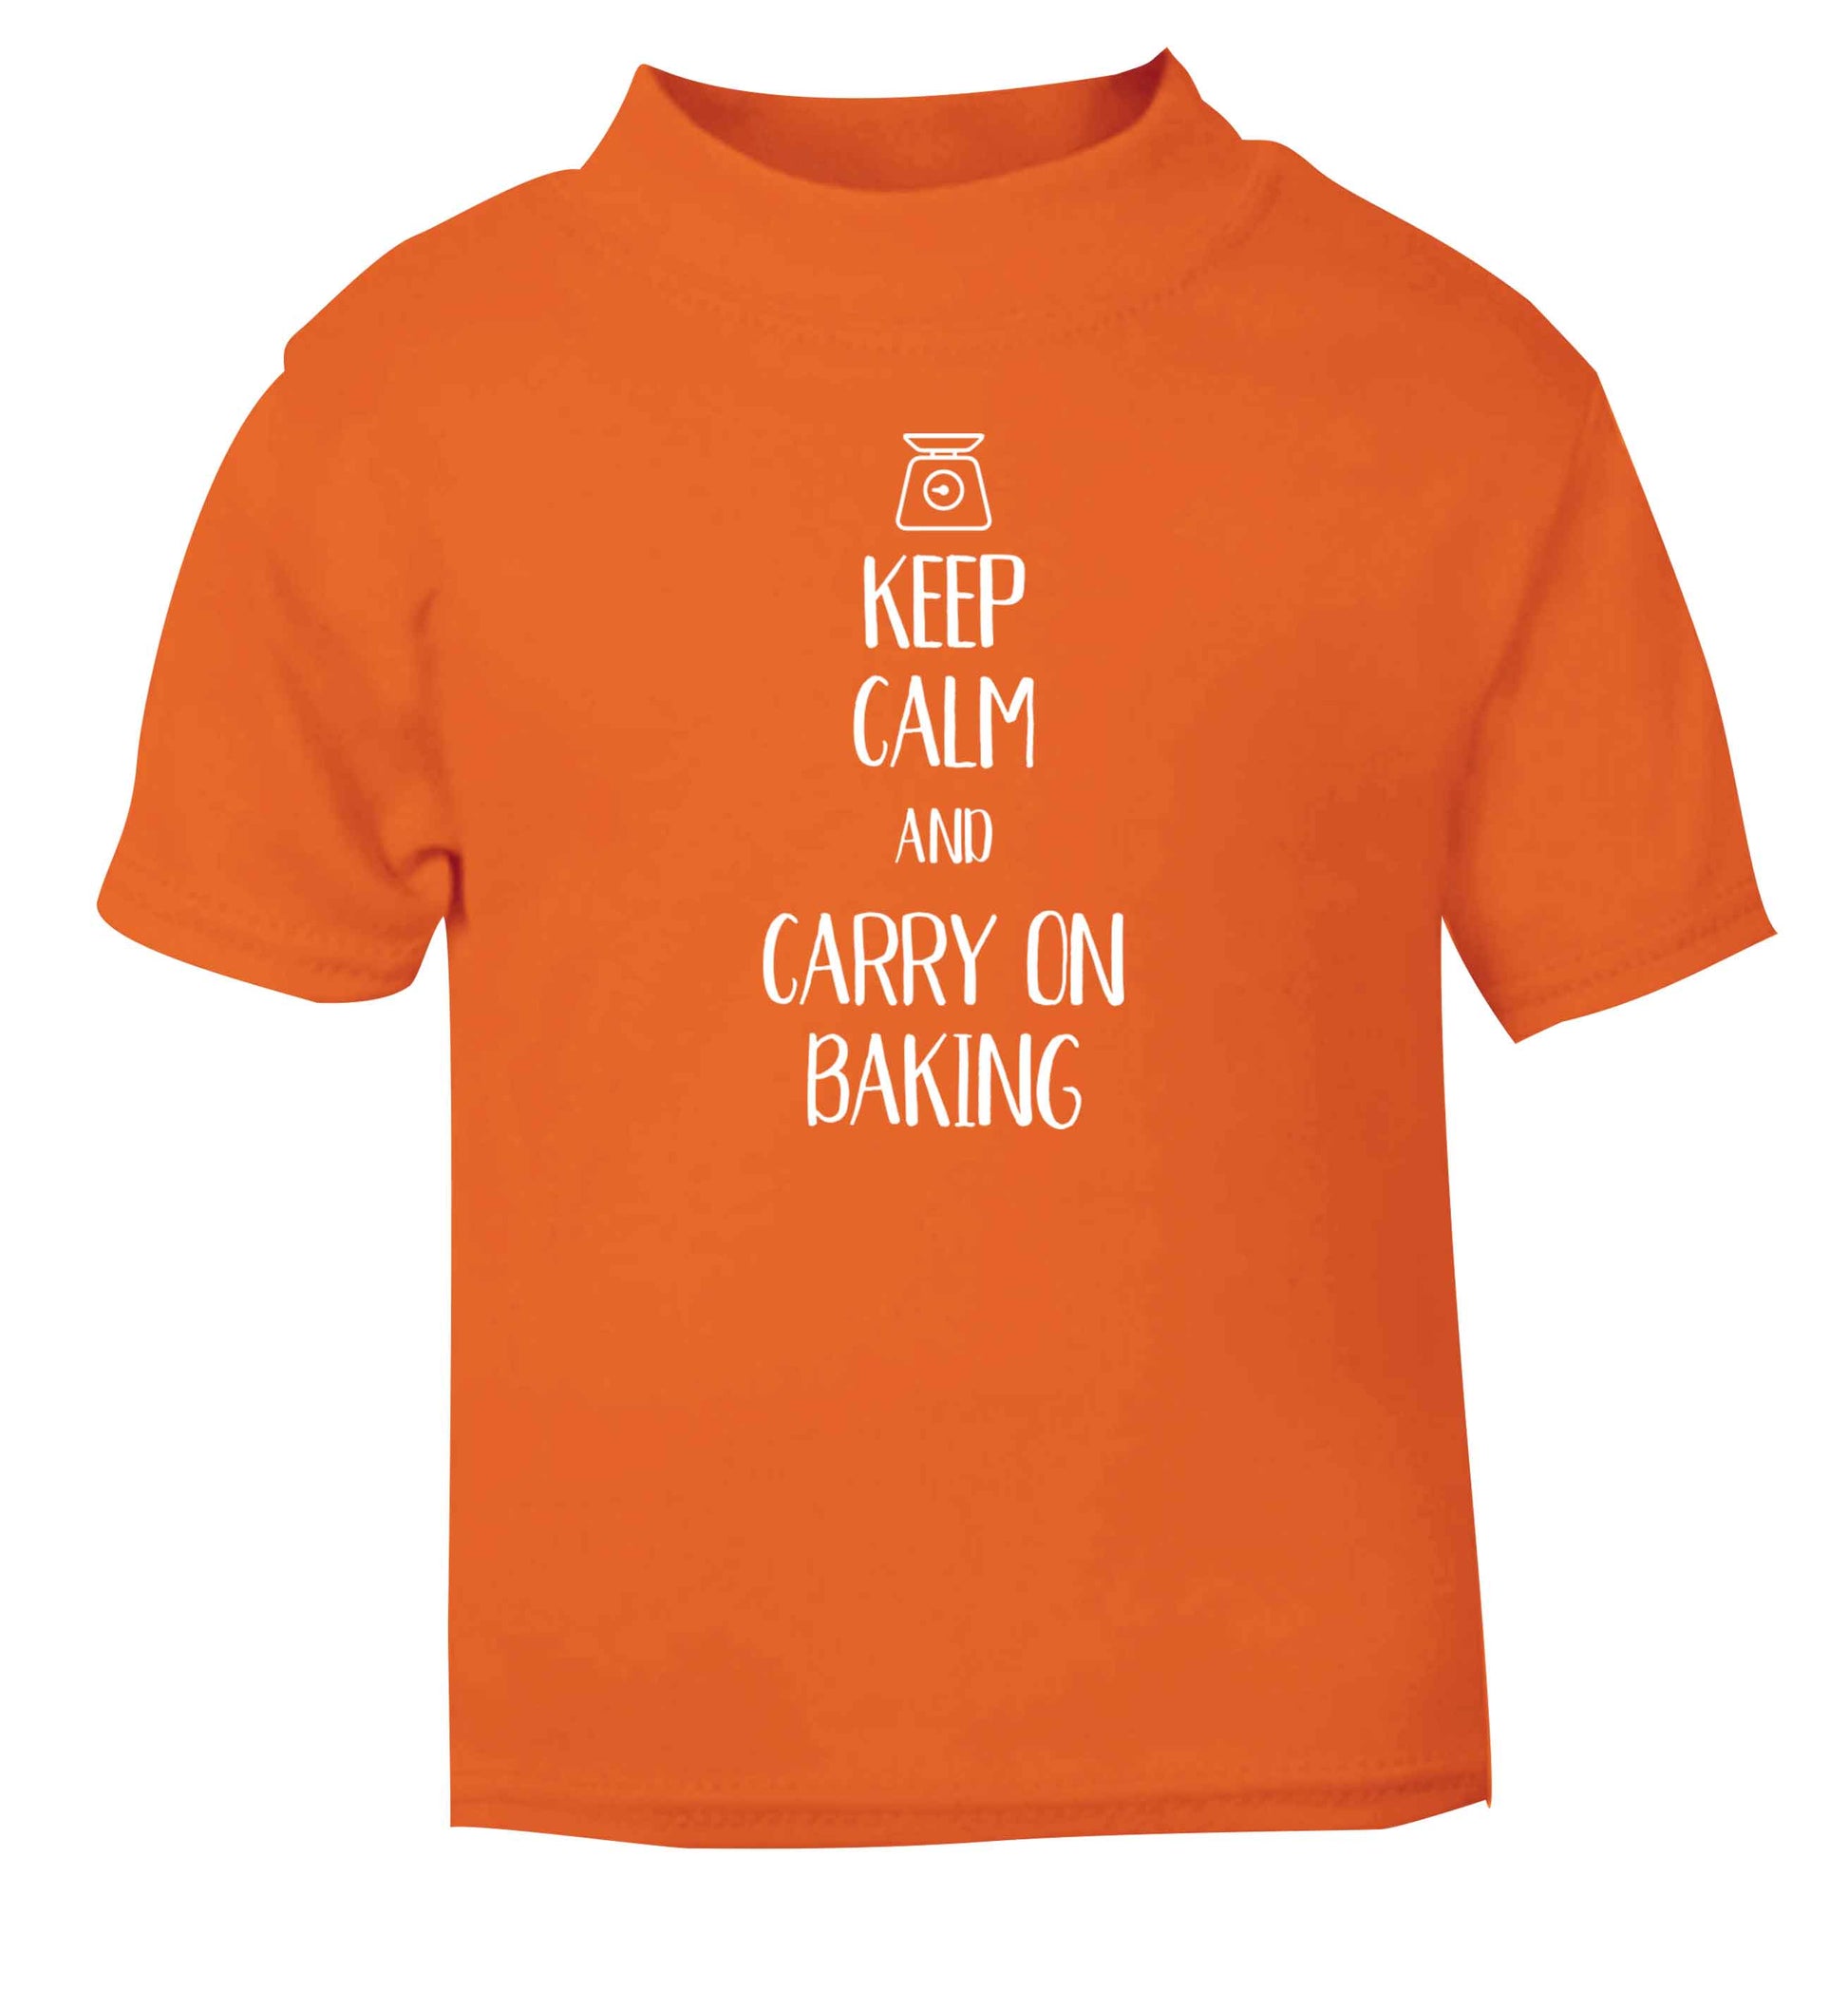 Keep calm and carry on baking orange Baby Toddler Tshirt 2 Years